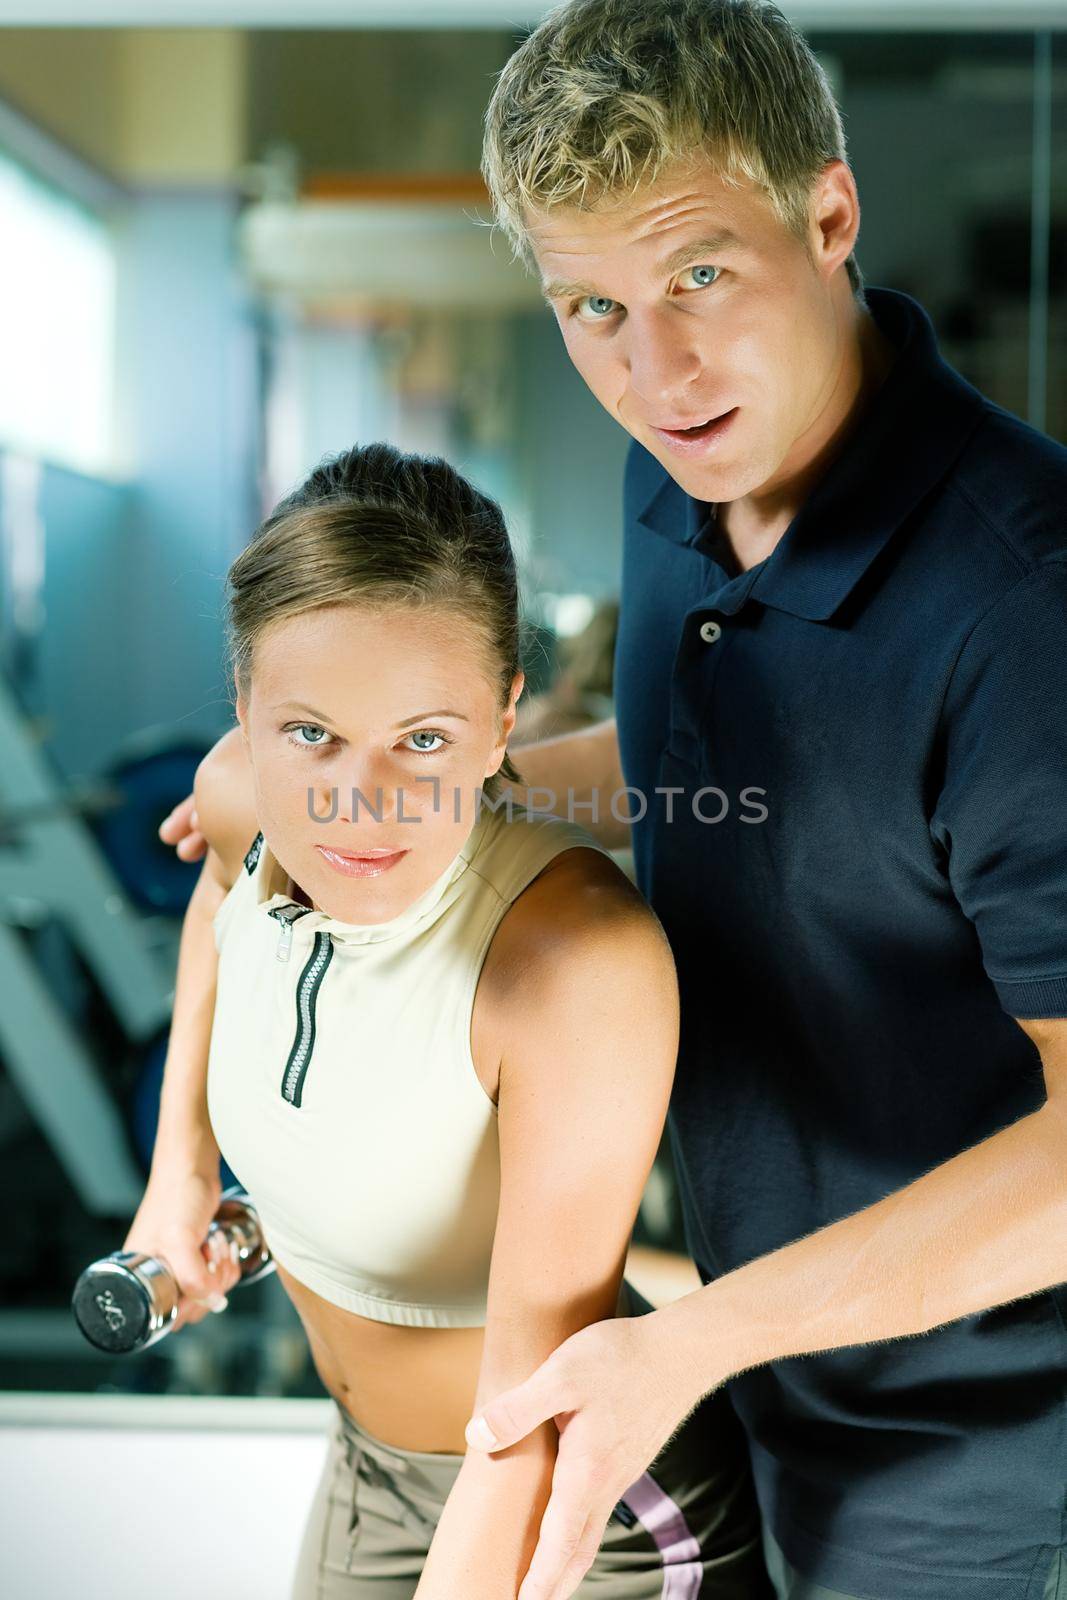 Trainer instructing a beautiful woman in the gym on how to properly exercise